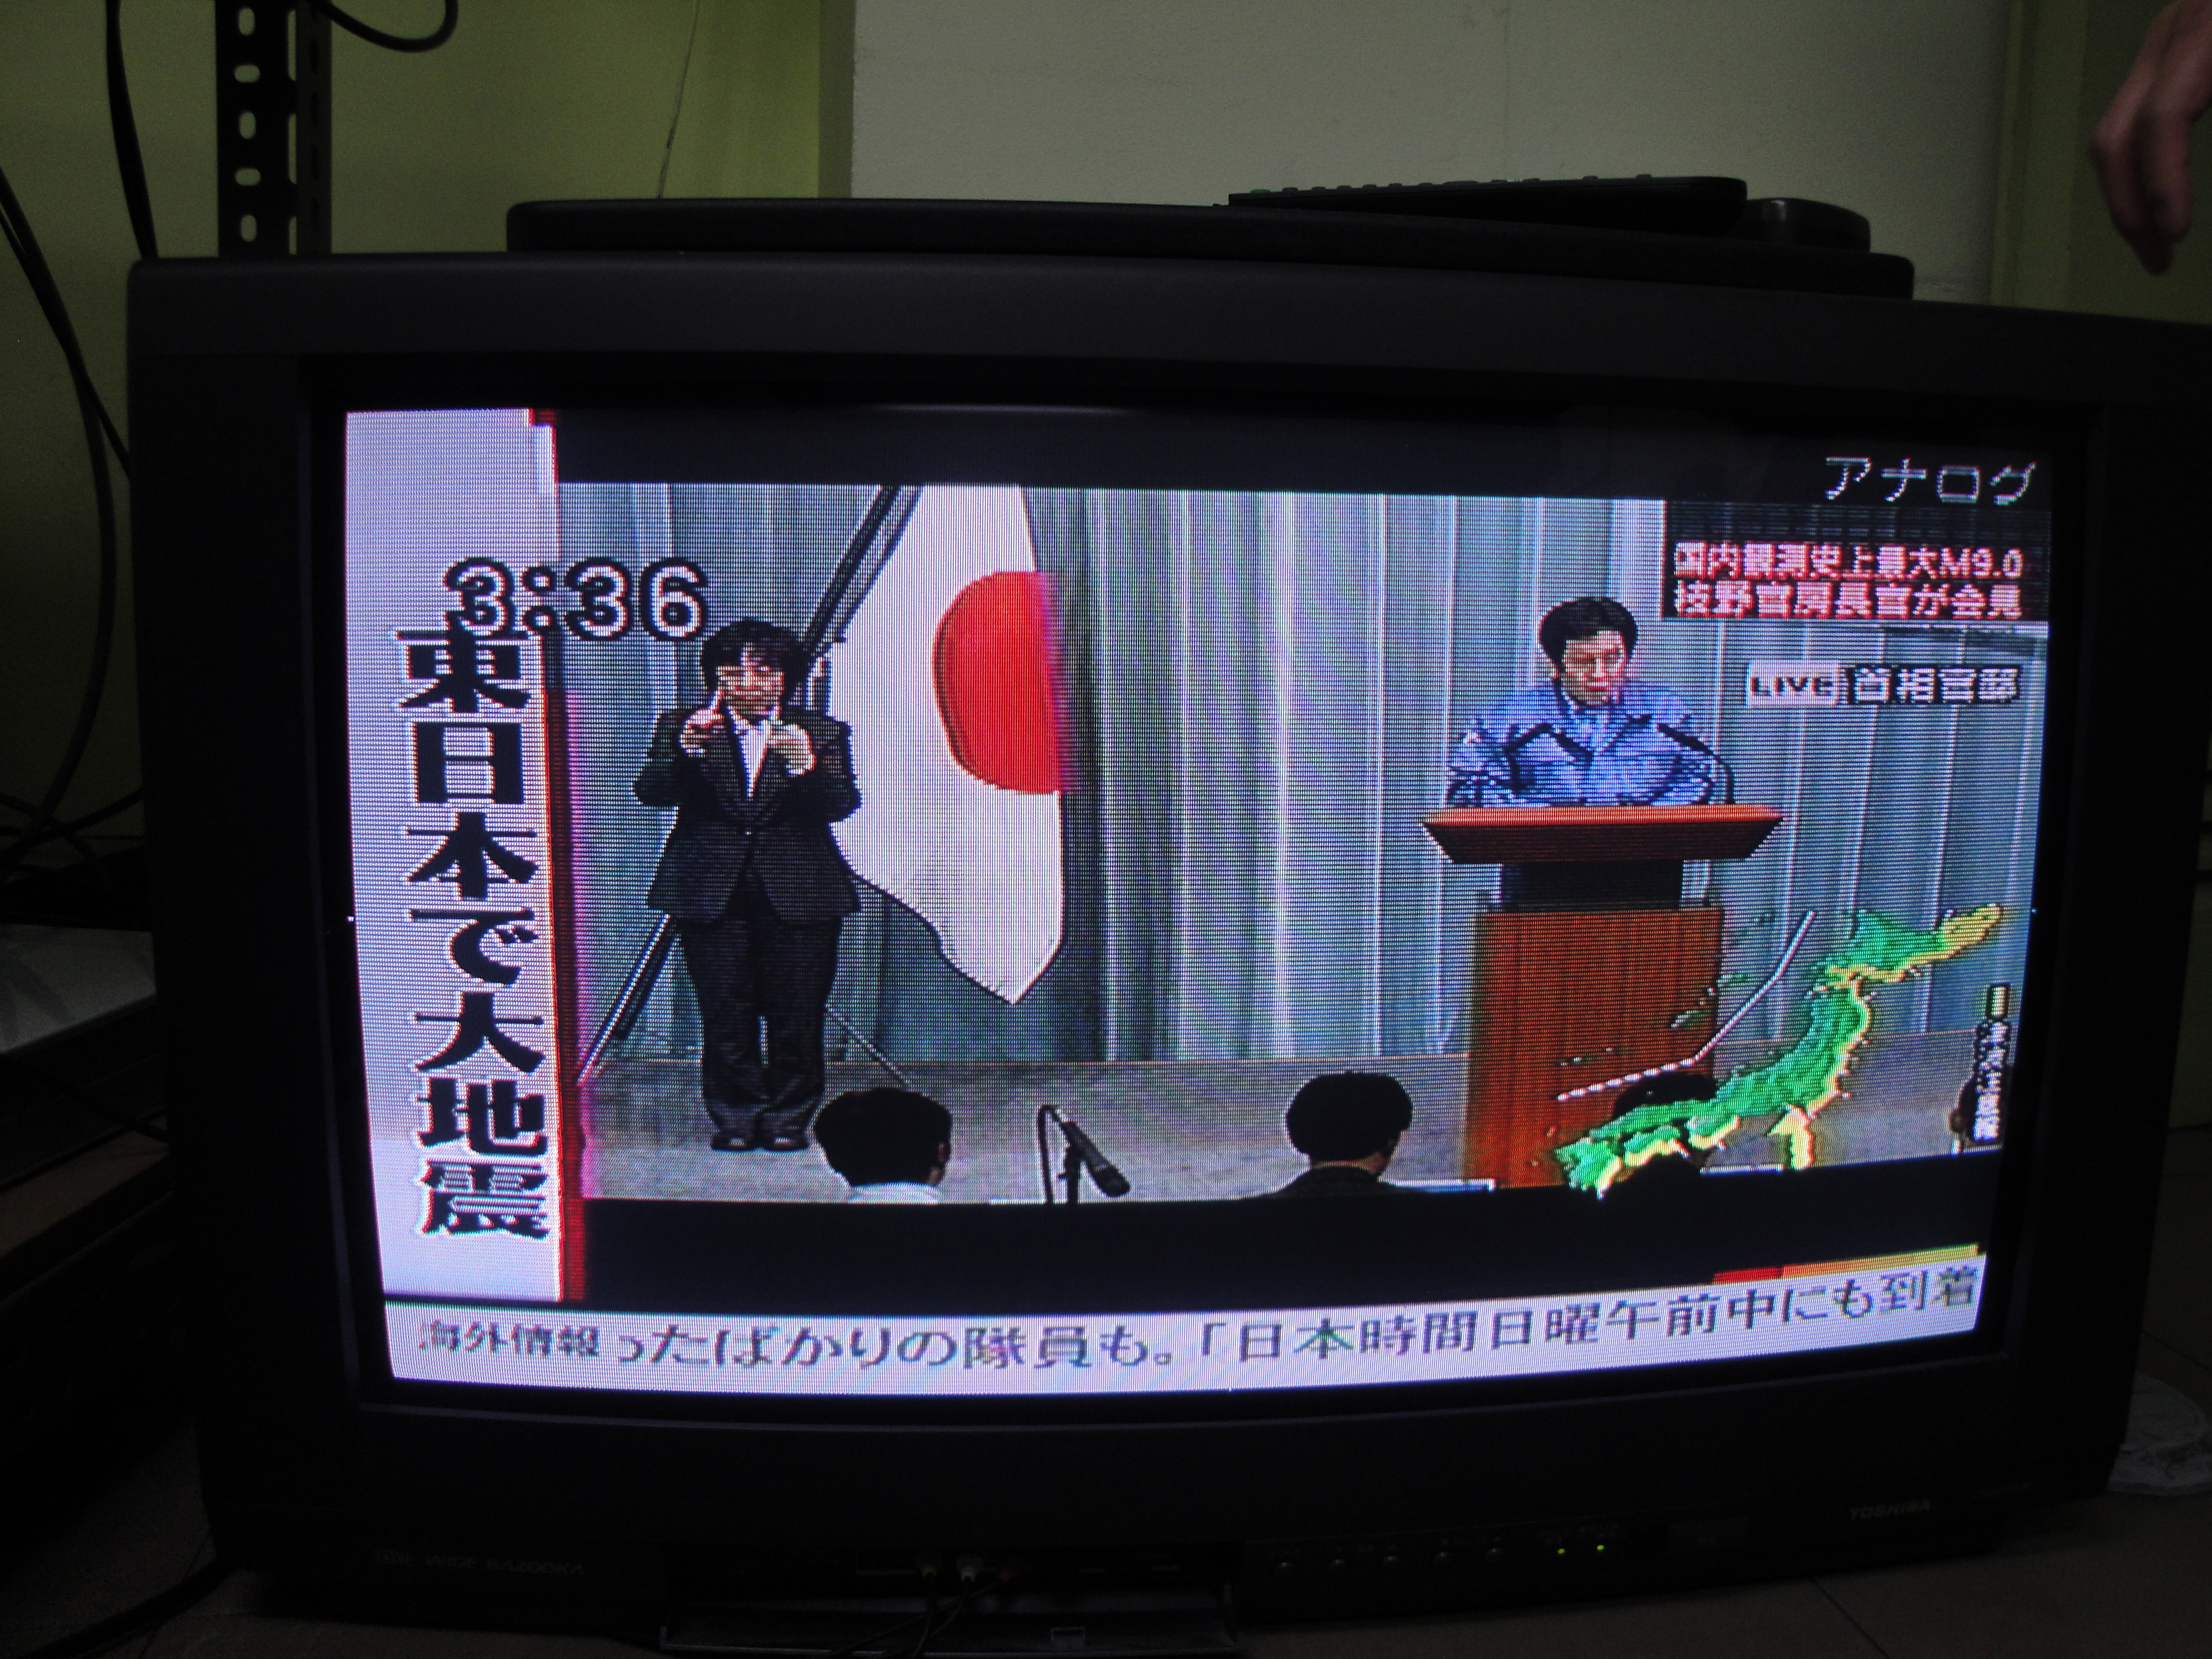 Sign language interpreters assigend to the press conferences at the Prime Minister's Official Residence.